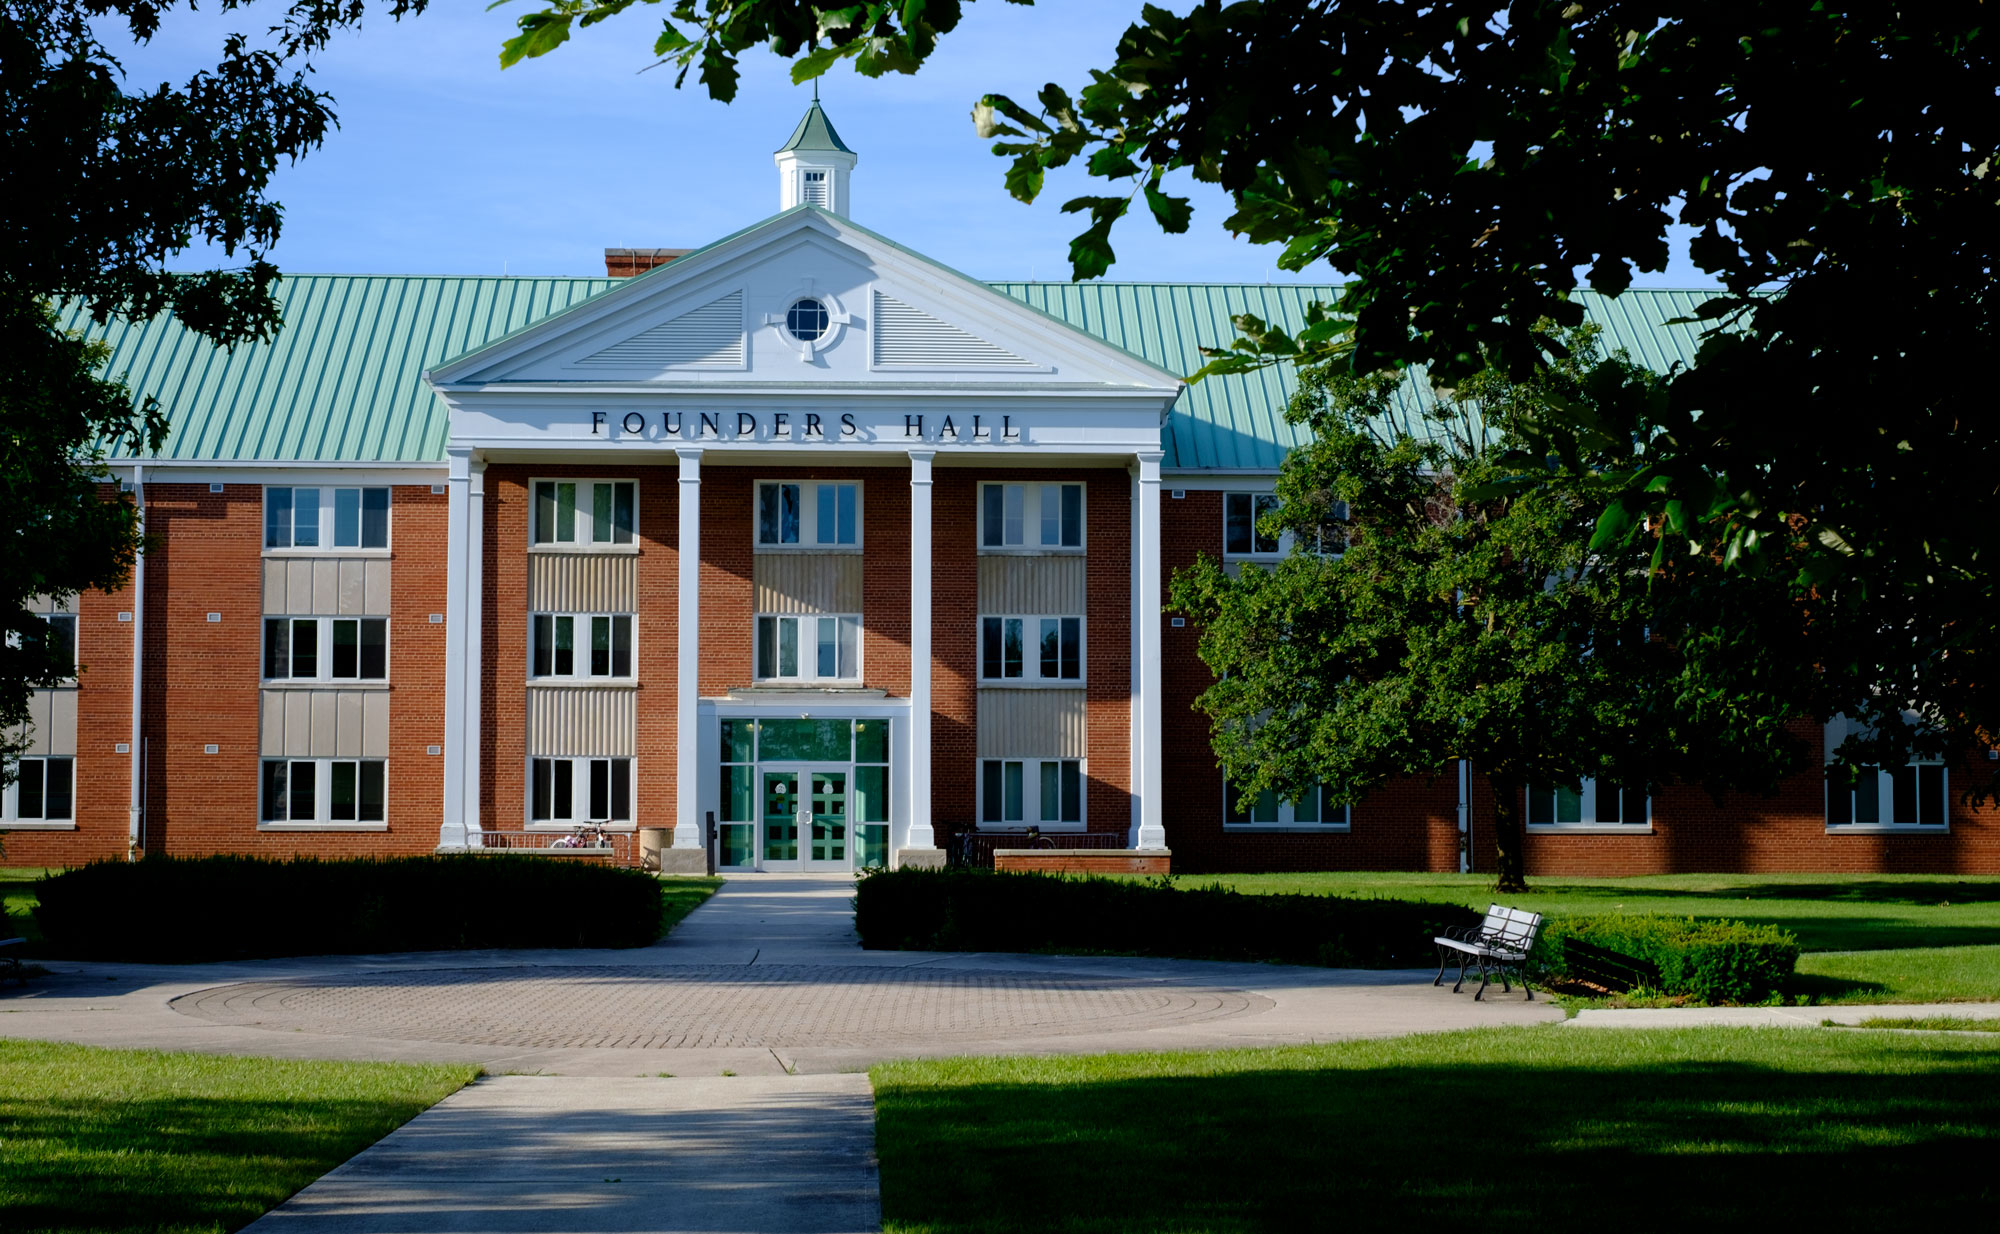 The exterior of Founders Hall at Ohio Northern University.